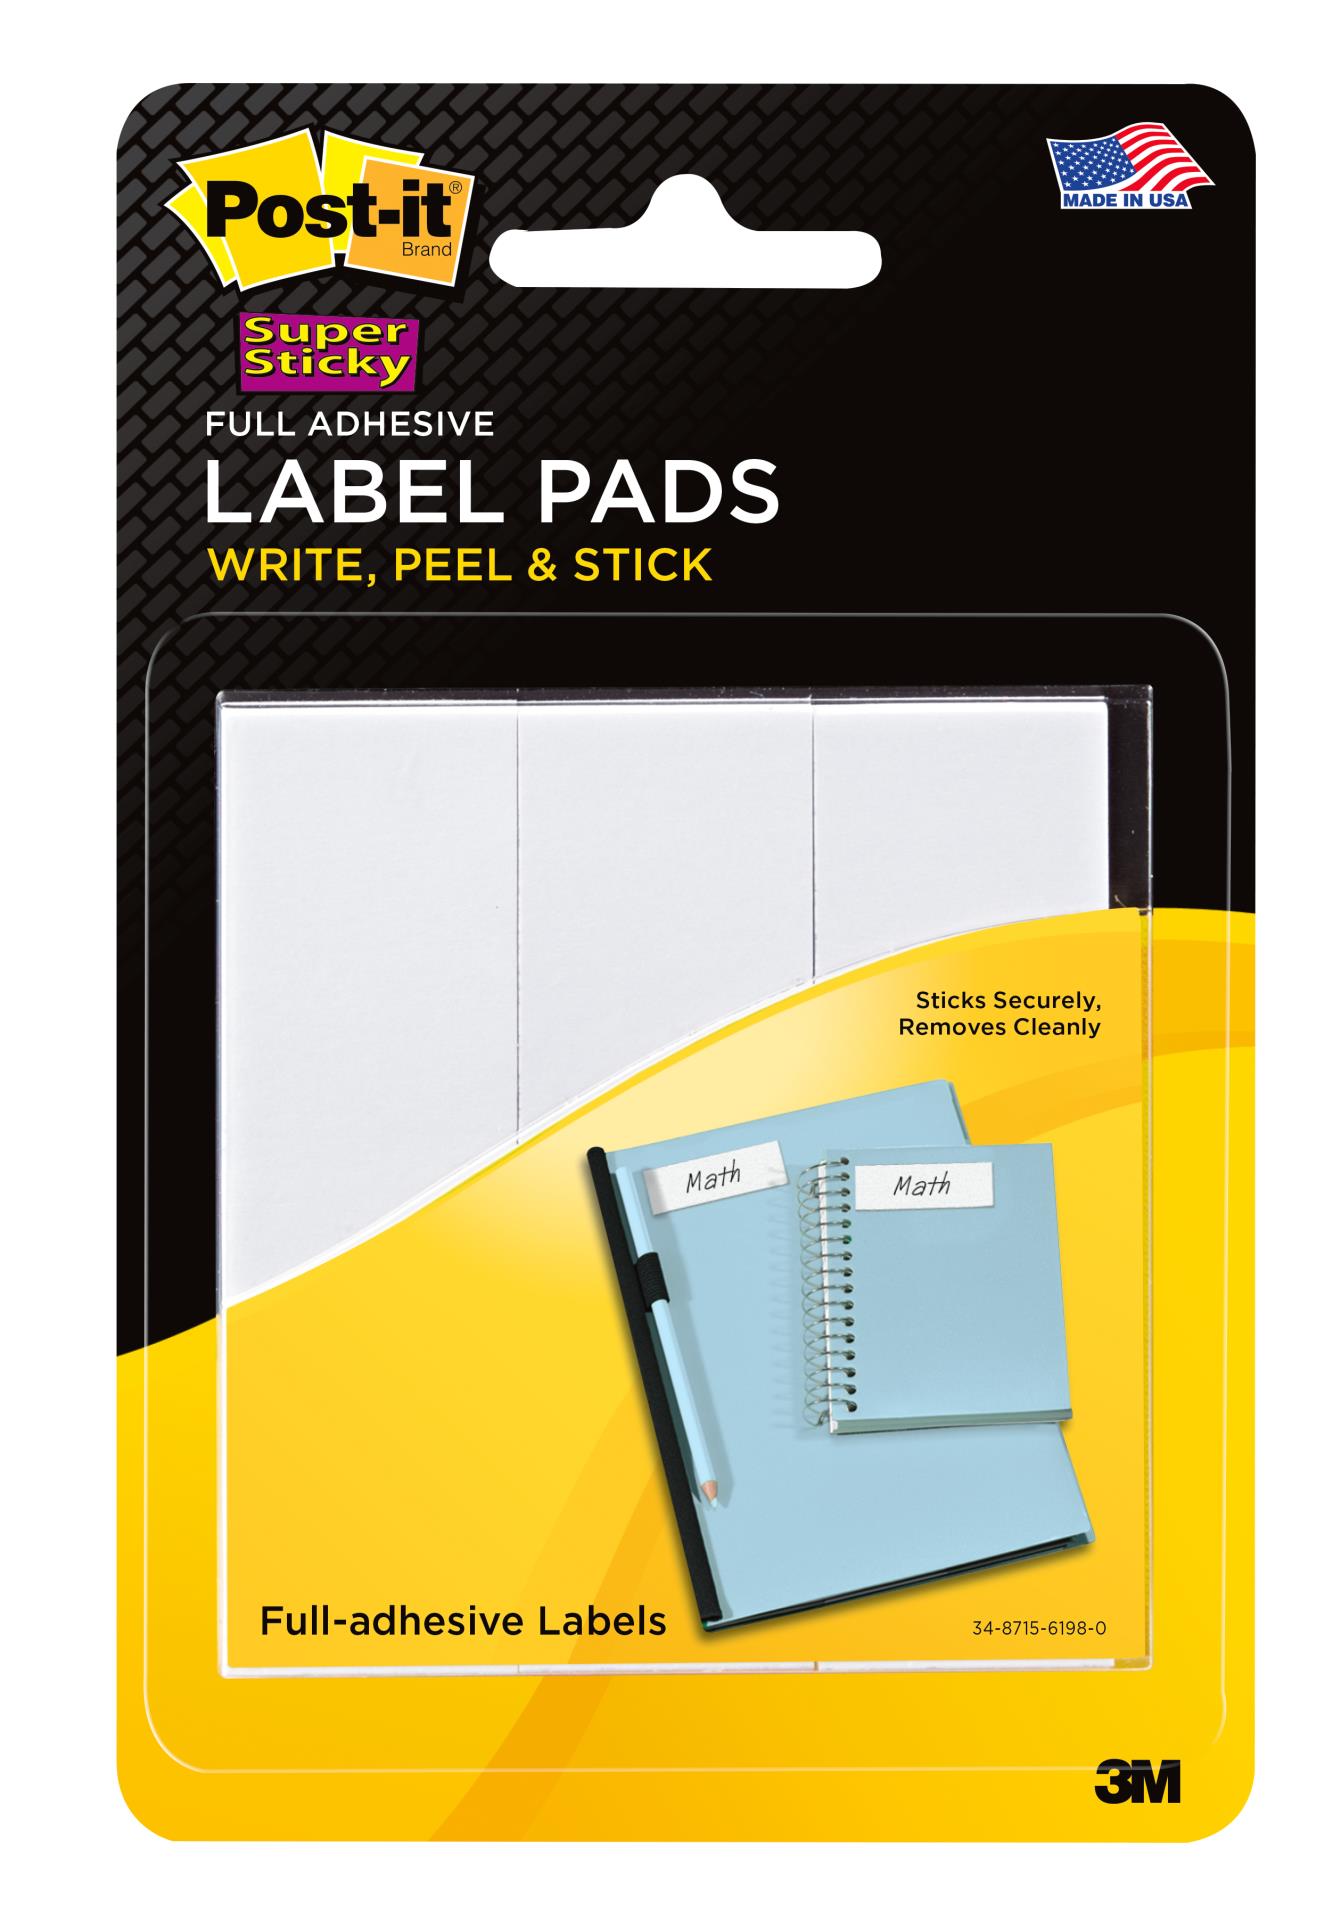 7010371022 - Post-it® Label Pads 2900-RBG, 1 in. x 3 in. (25,4 mm x 76,2 mm), Removable, White, 75 Labels/Pack, 3 Pads/Pack, 25 Labels/Pad